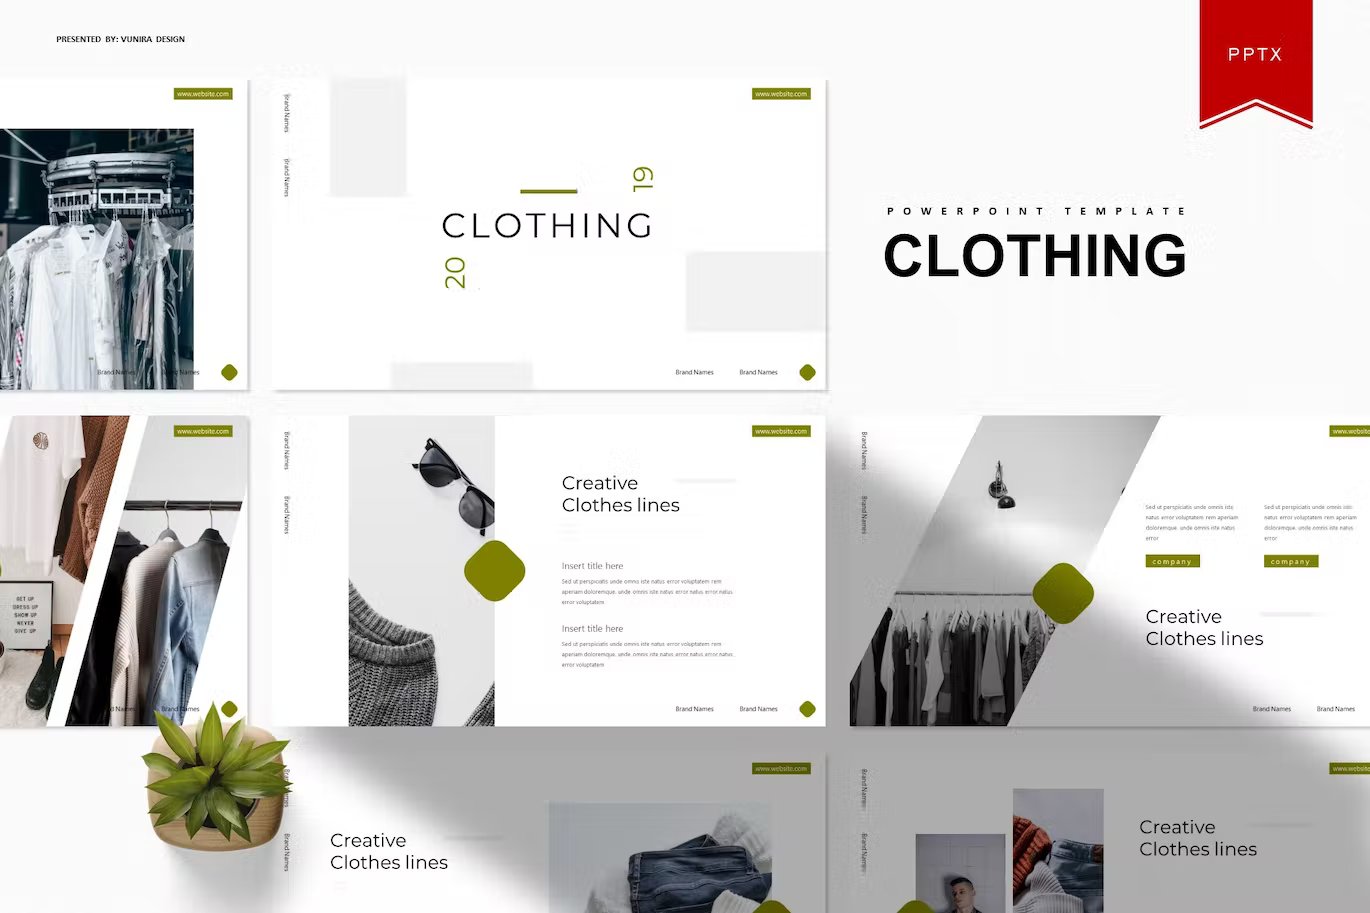 Black lettering "Clothing Powerpoint Template" and different templates on a gray background.